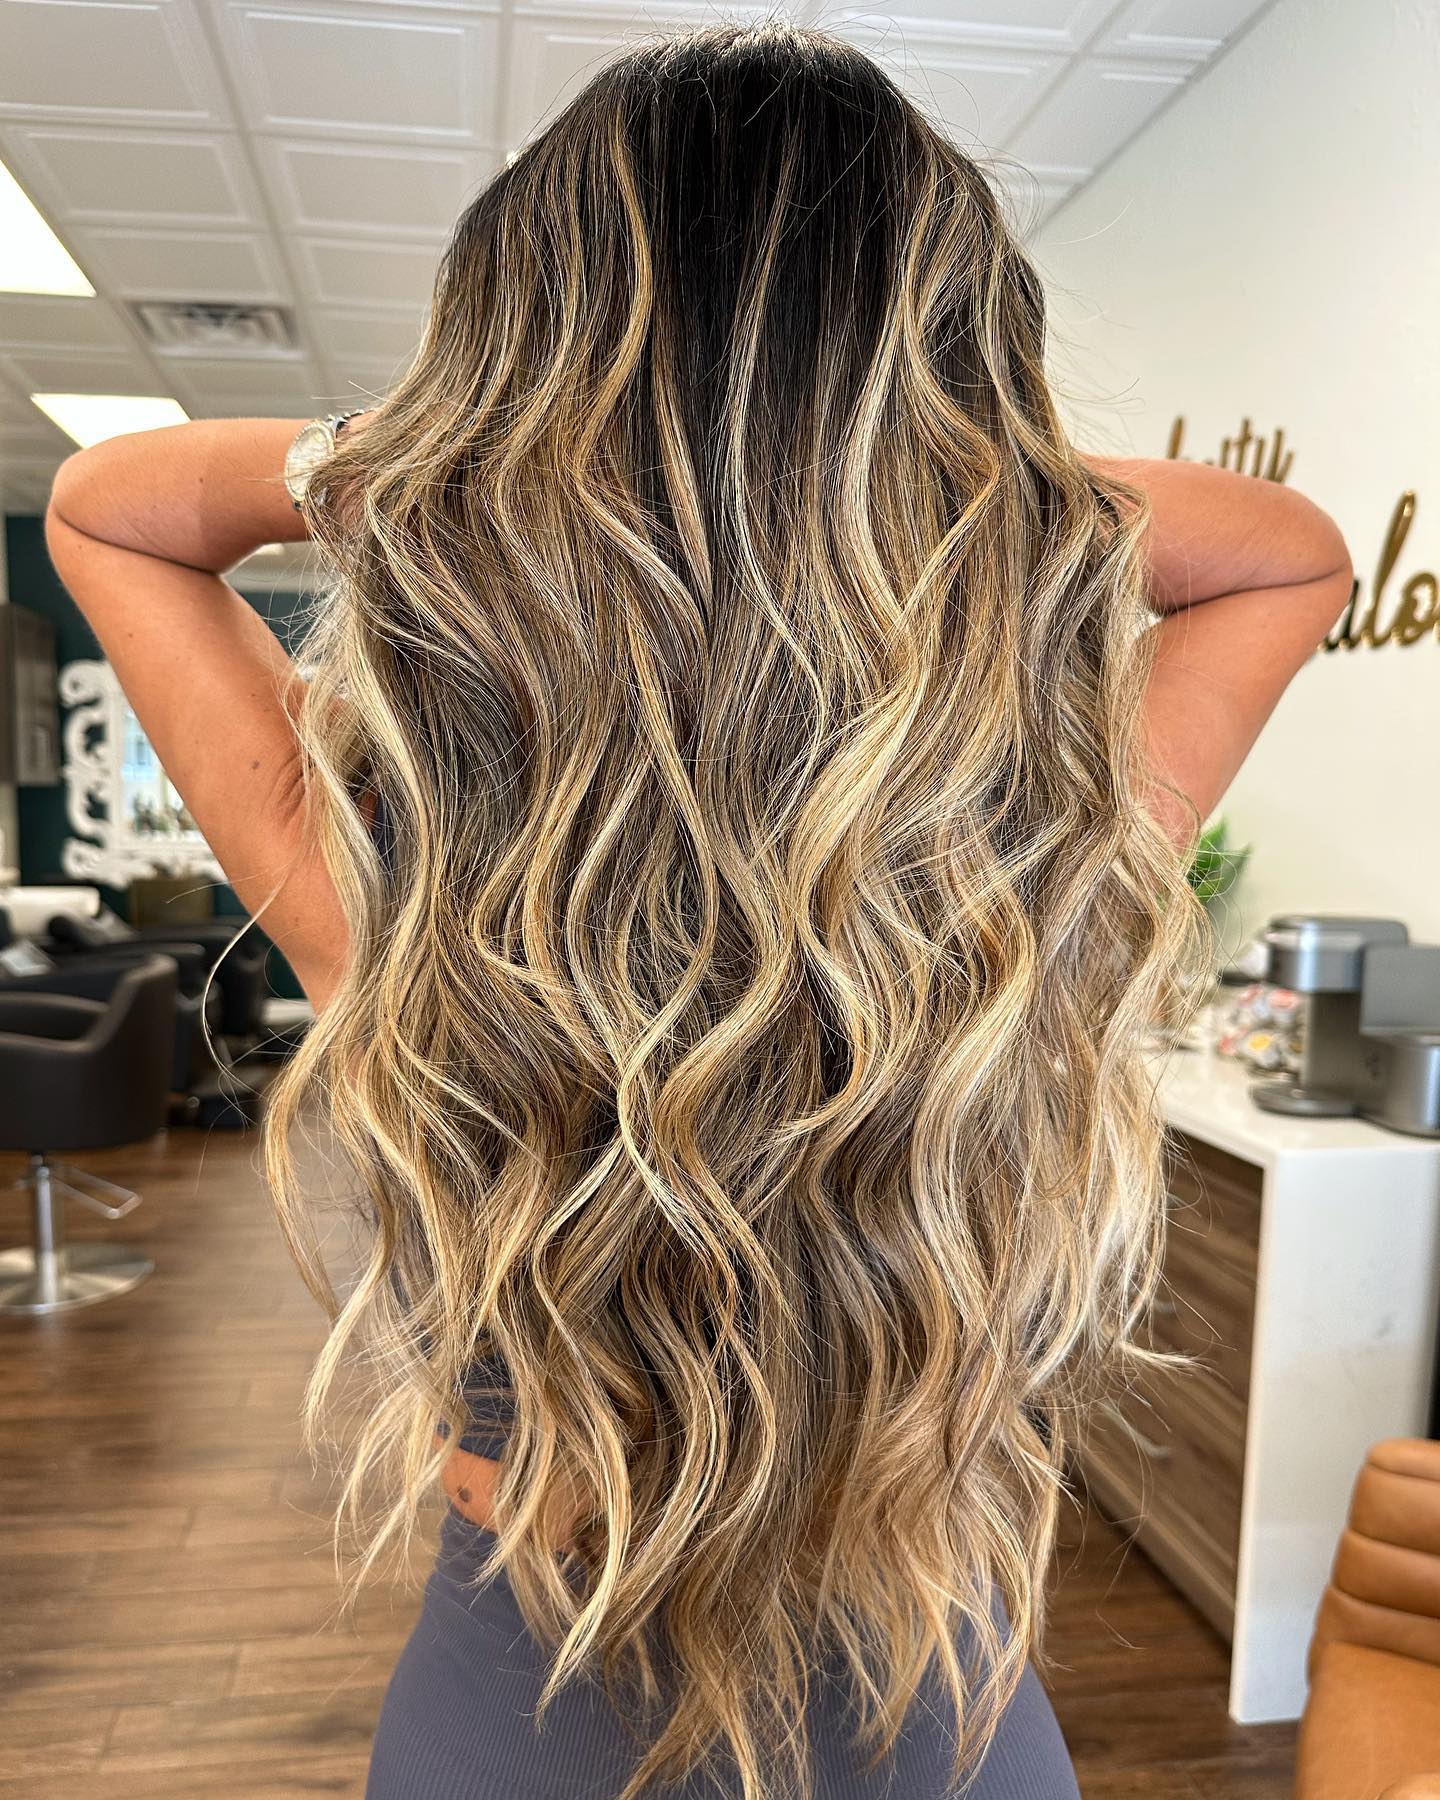 Long Wavy Hairstyle with blonde Highlights